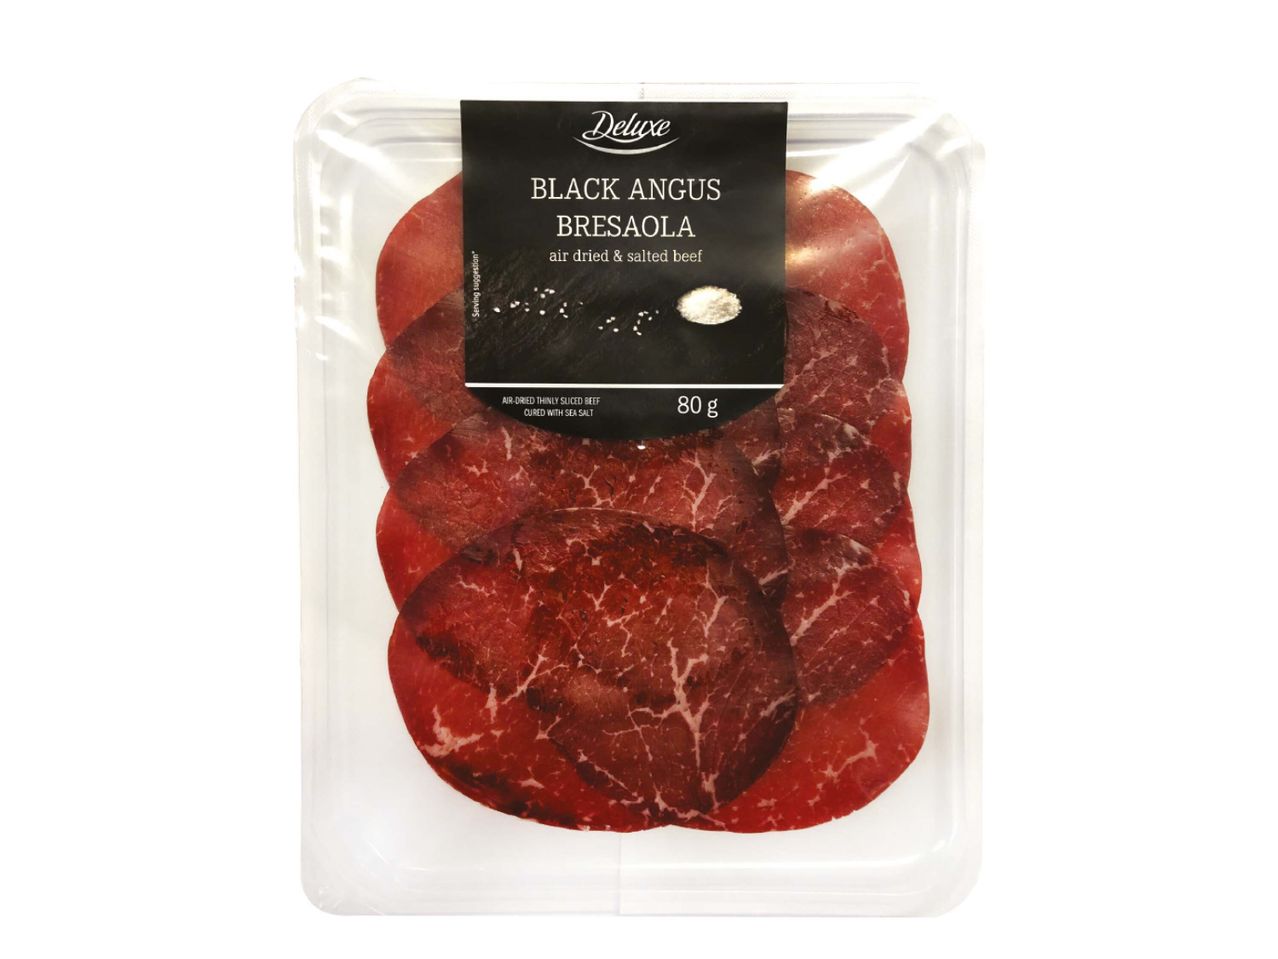 Go to full screen view: Black Angus Bresaola - Image 1